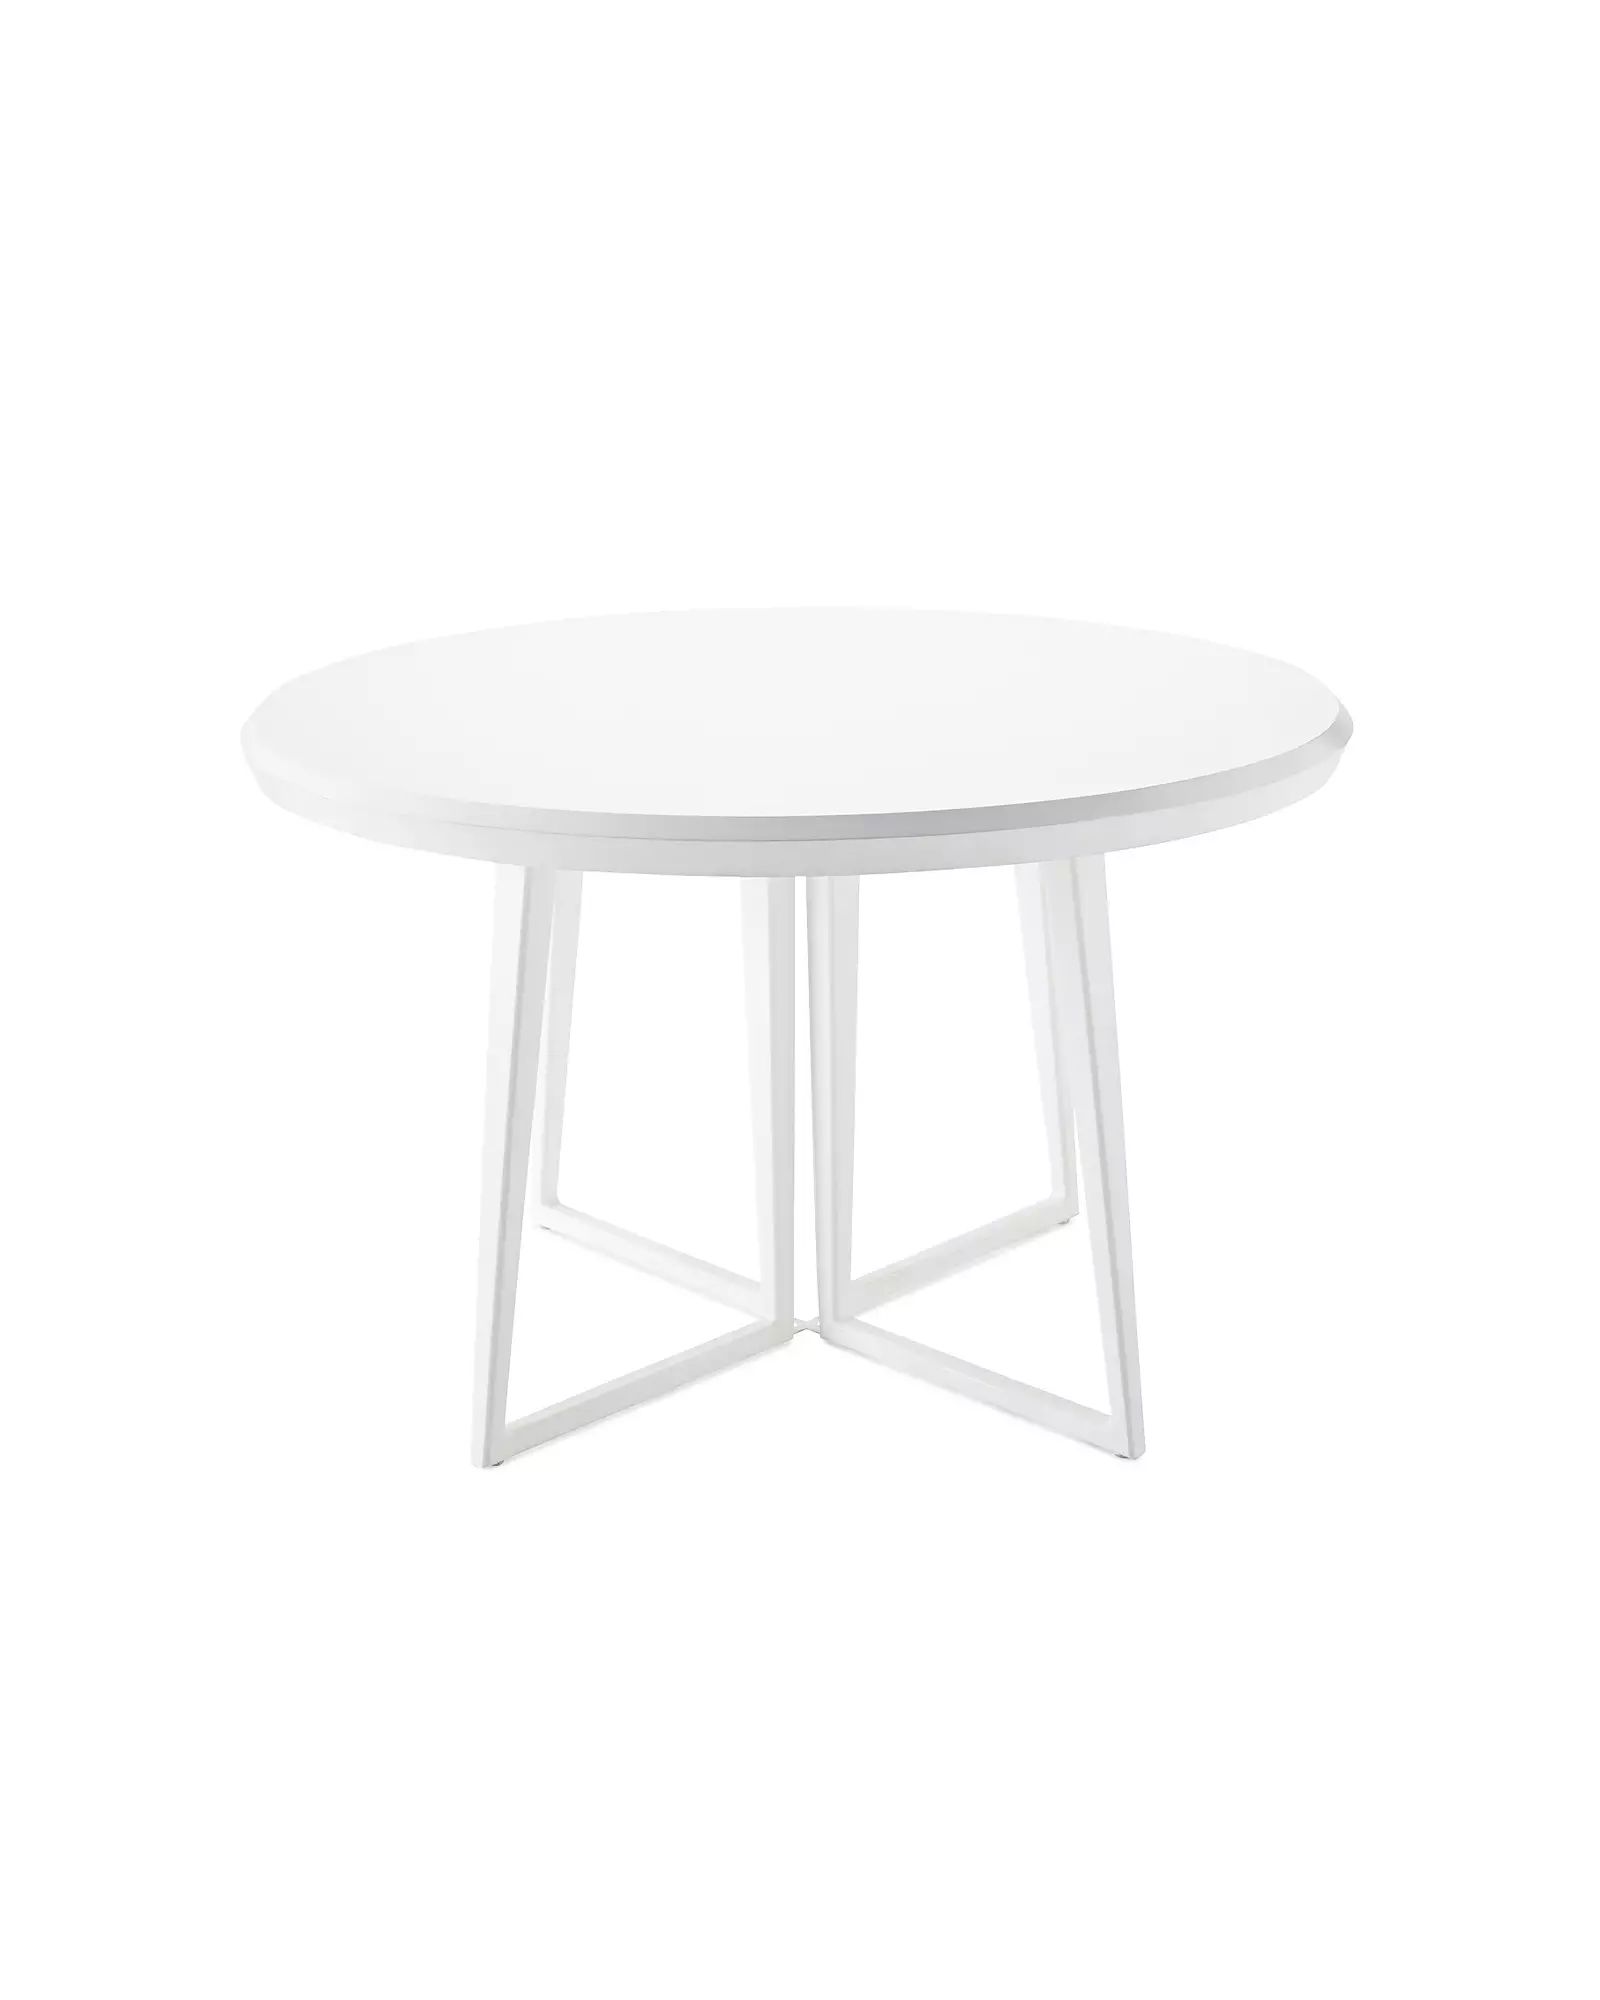 Downing Round Dining Table | Serena and Lily